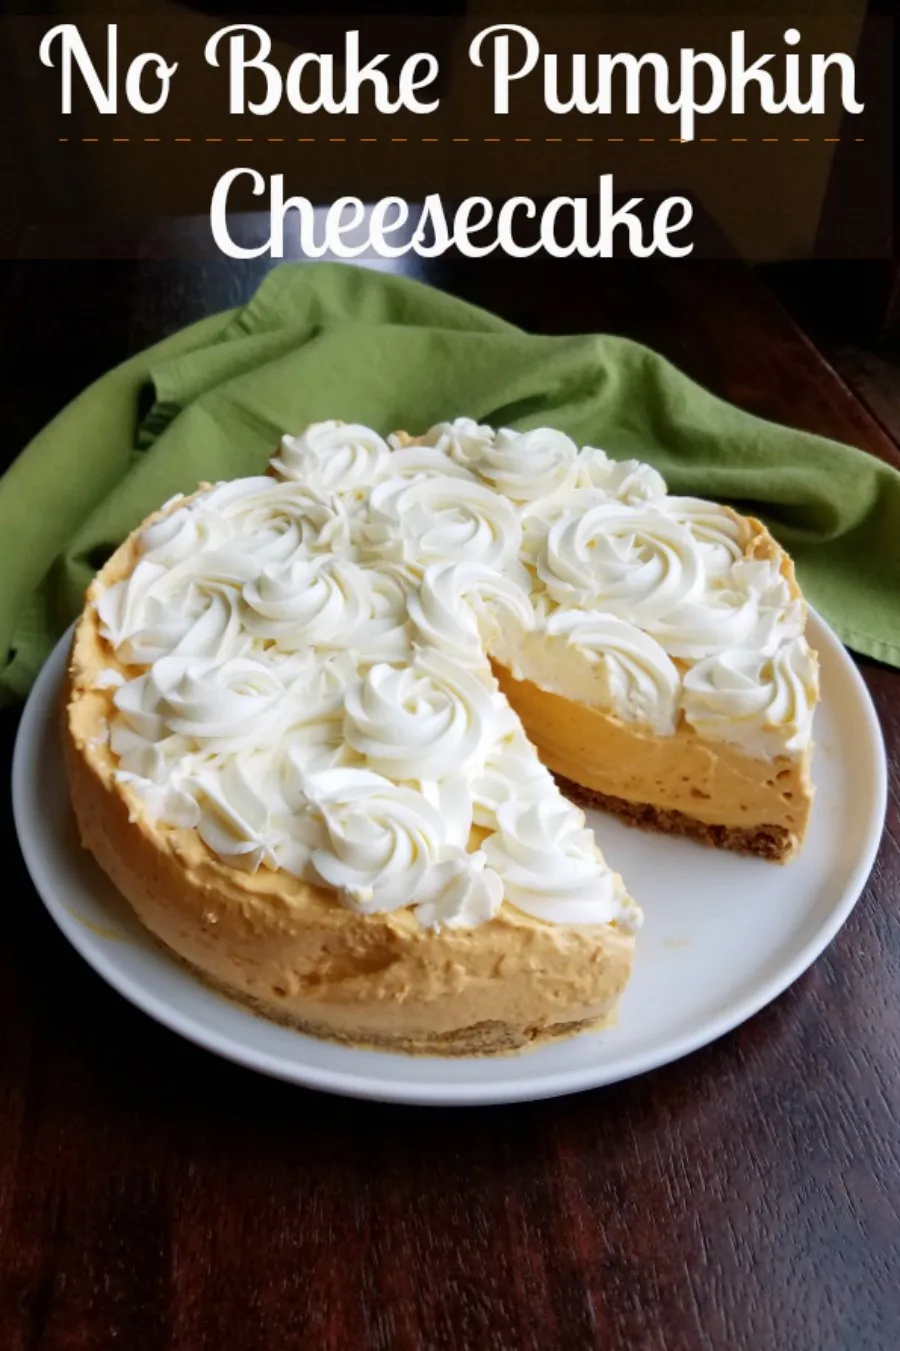 Soft and airy pumpkin filled no bake cheesecake is the perfect transitional fall dessert. It’s also great for the holidays when your oven is full of other things. It has a nice pumpkin spice roundness to it and the vanilla cheesecake topping takes it to the next level!